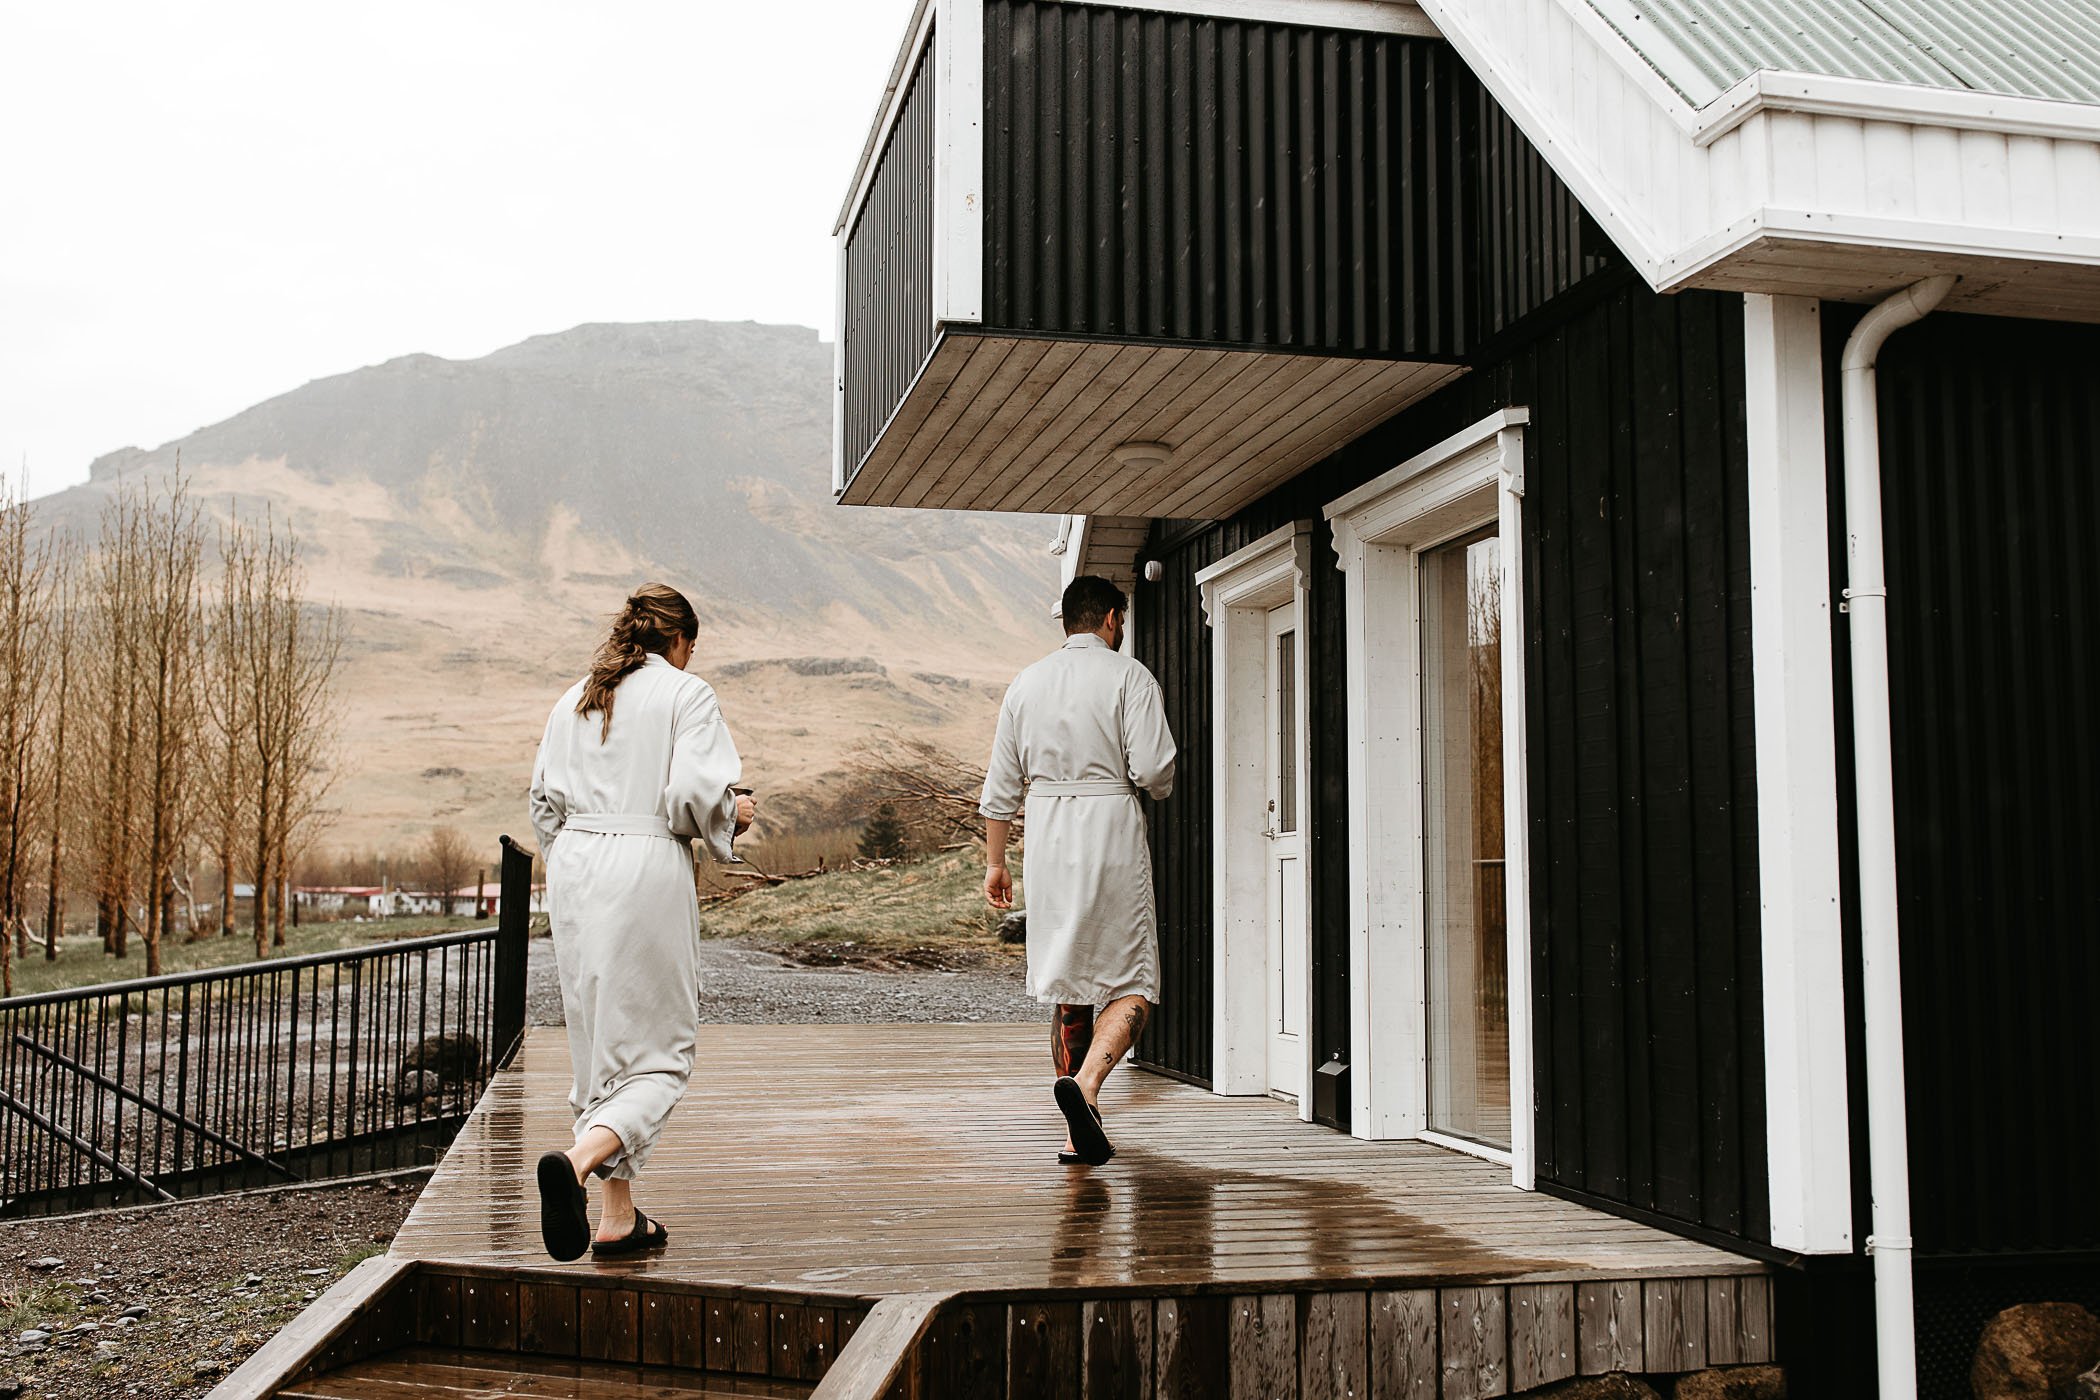 Eloping-in-Iceland-Full-Guide-to-Getting-Married-in-Iceland-Elopement-Photographer--131.jpg